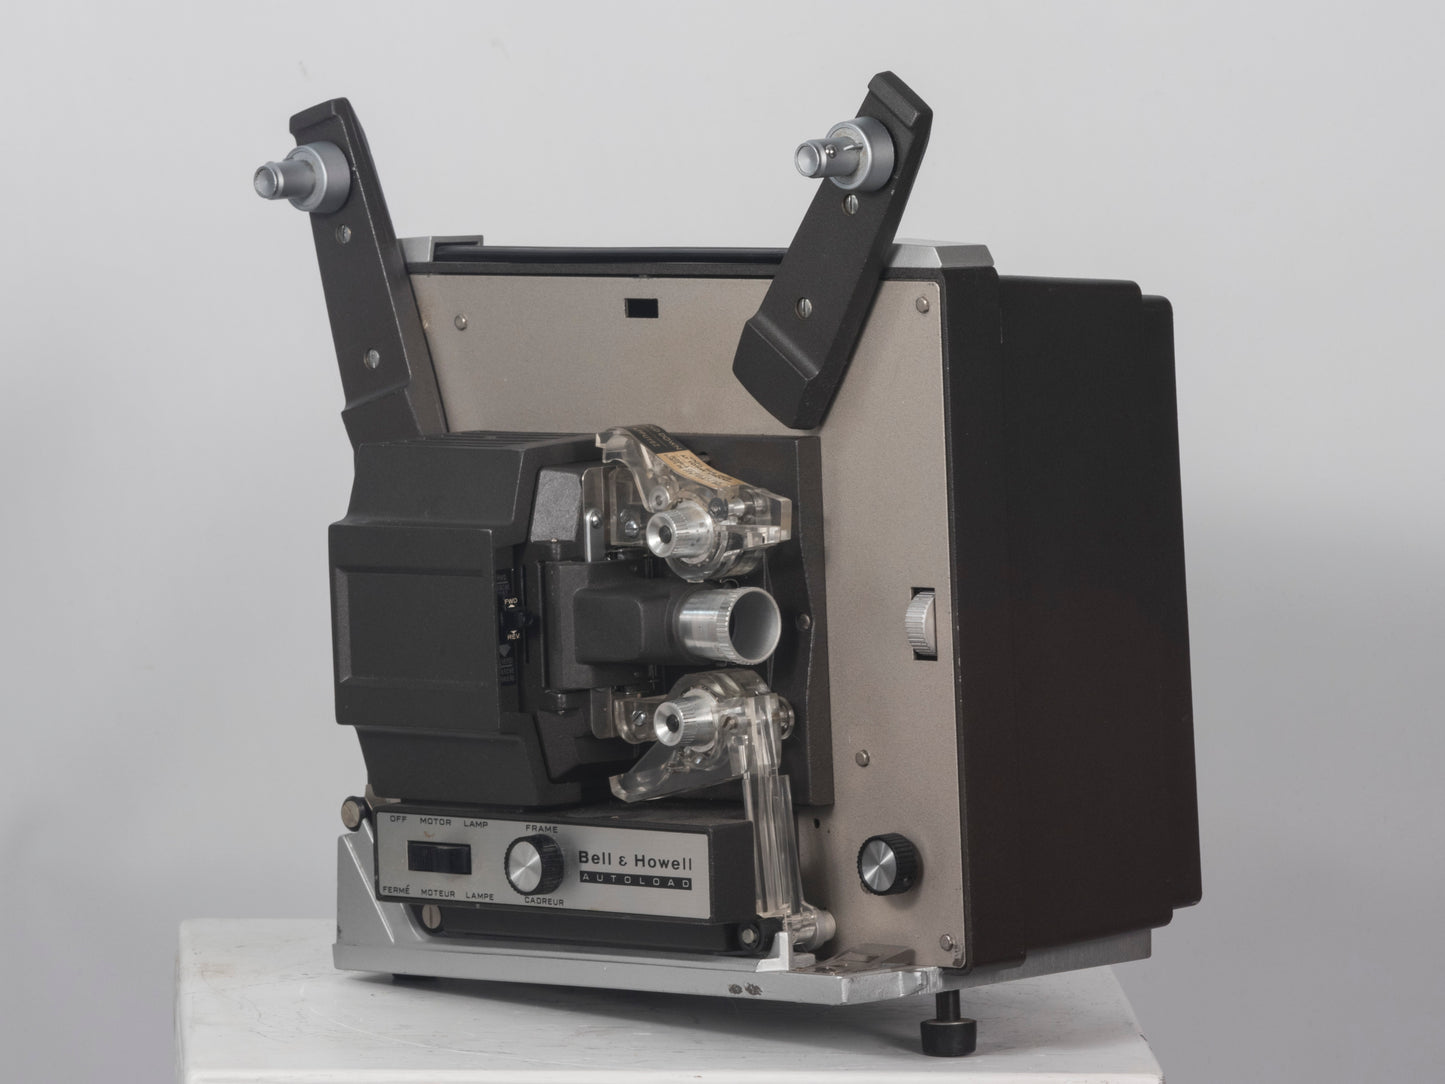 Bell and Howell 356 Super 8 movie projector